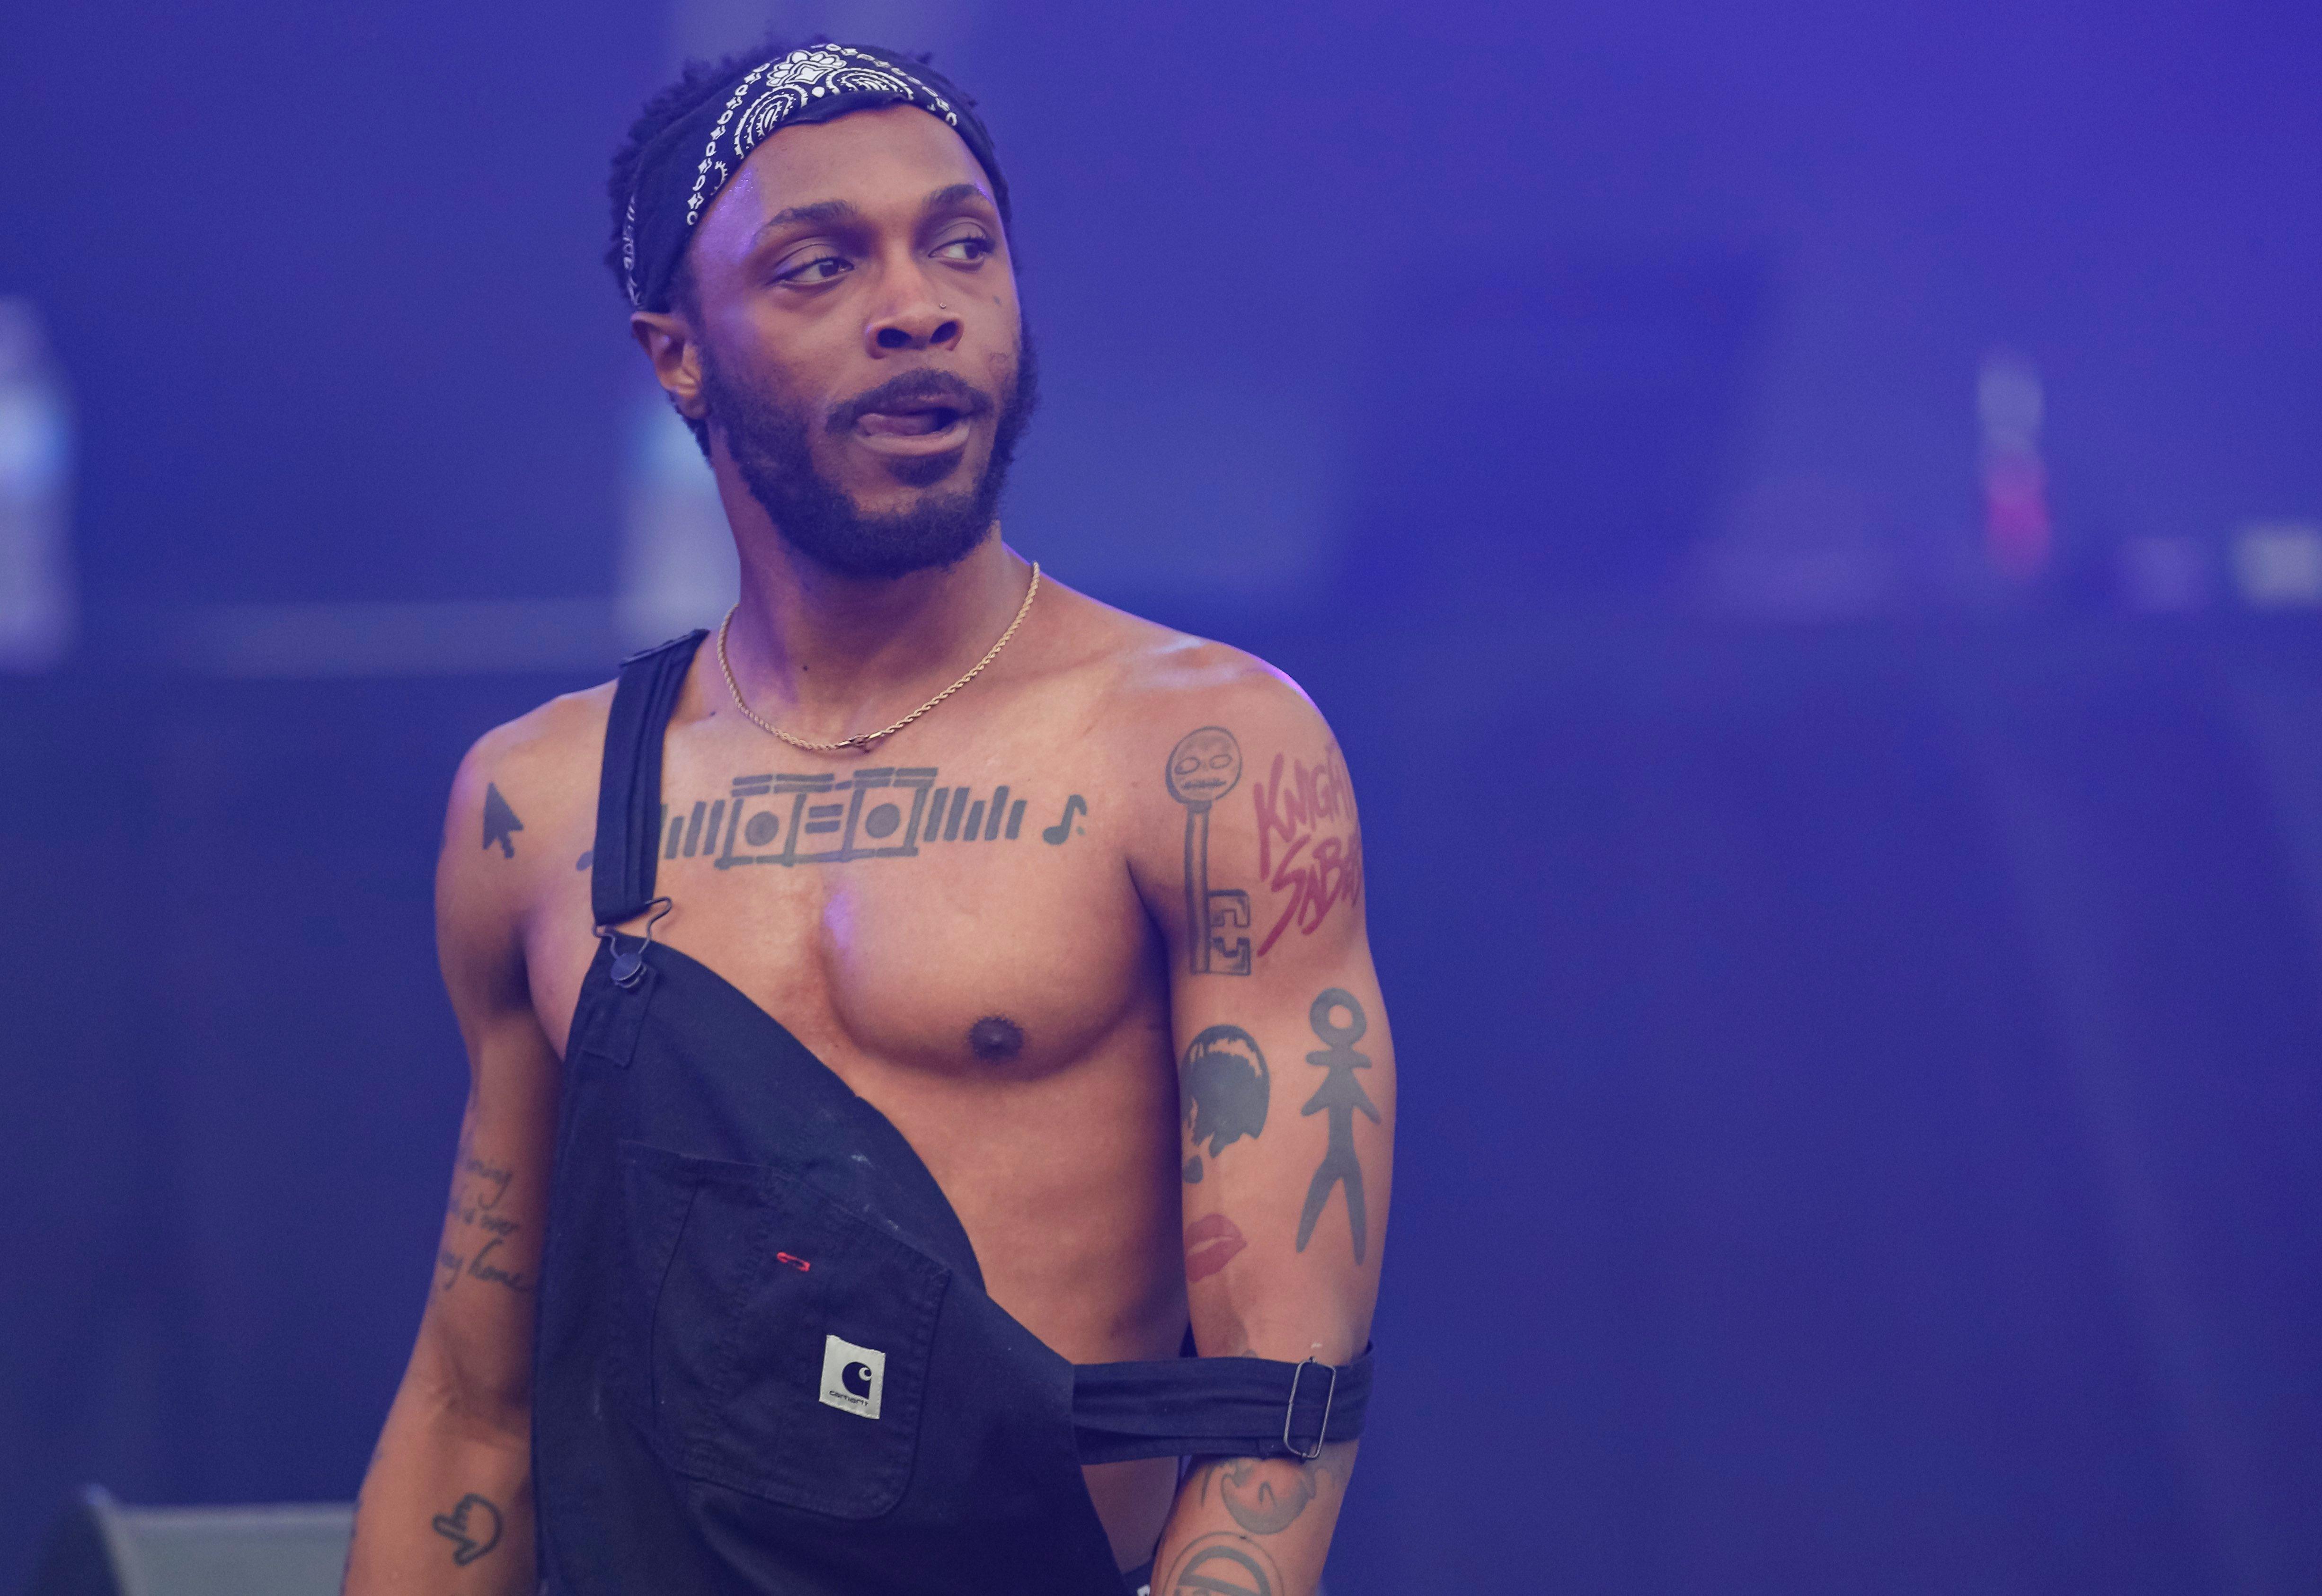 rapper JPEGMAFIA poses on stage wearing overalls